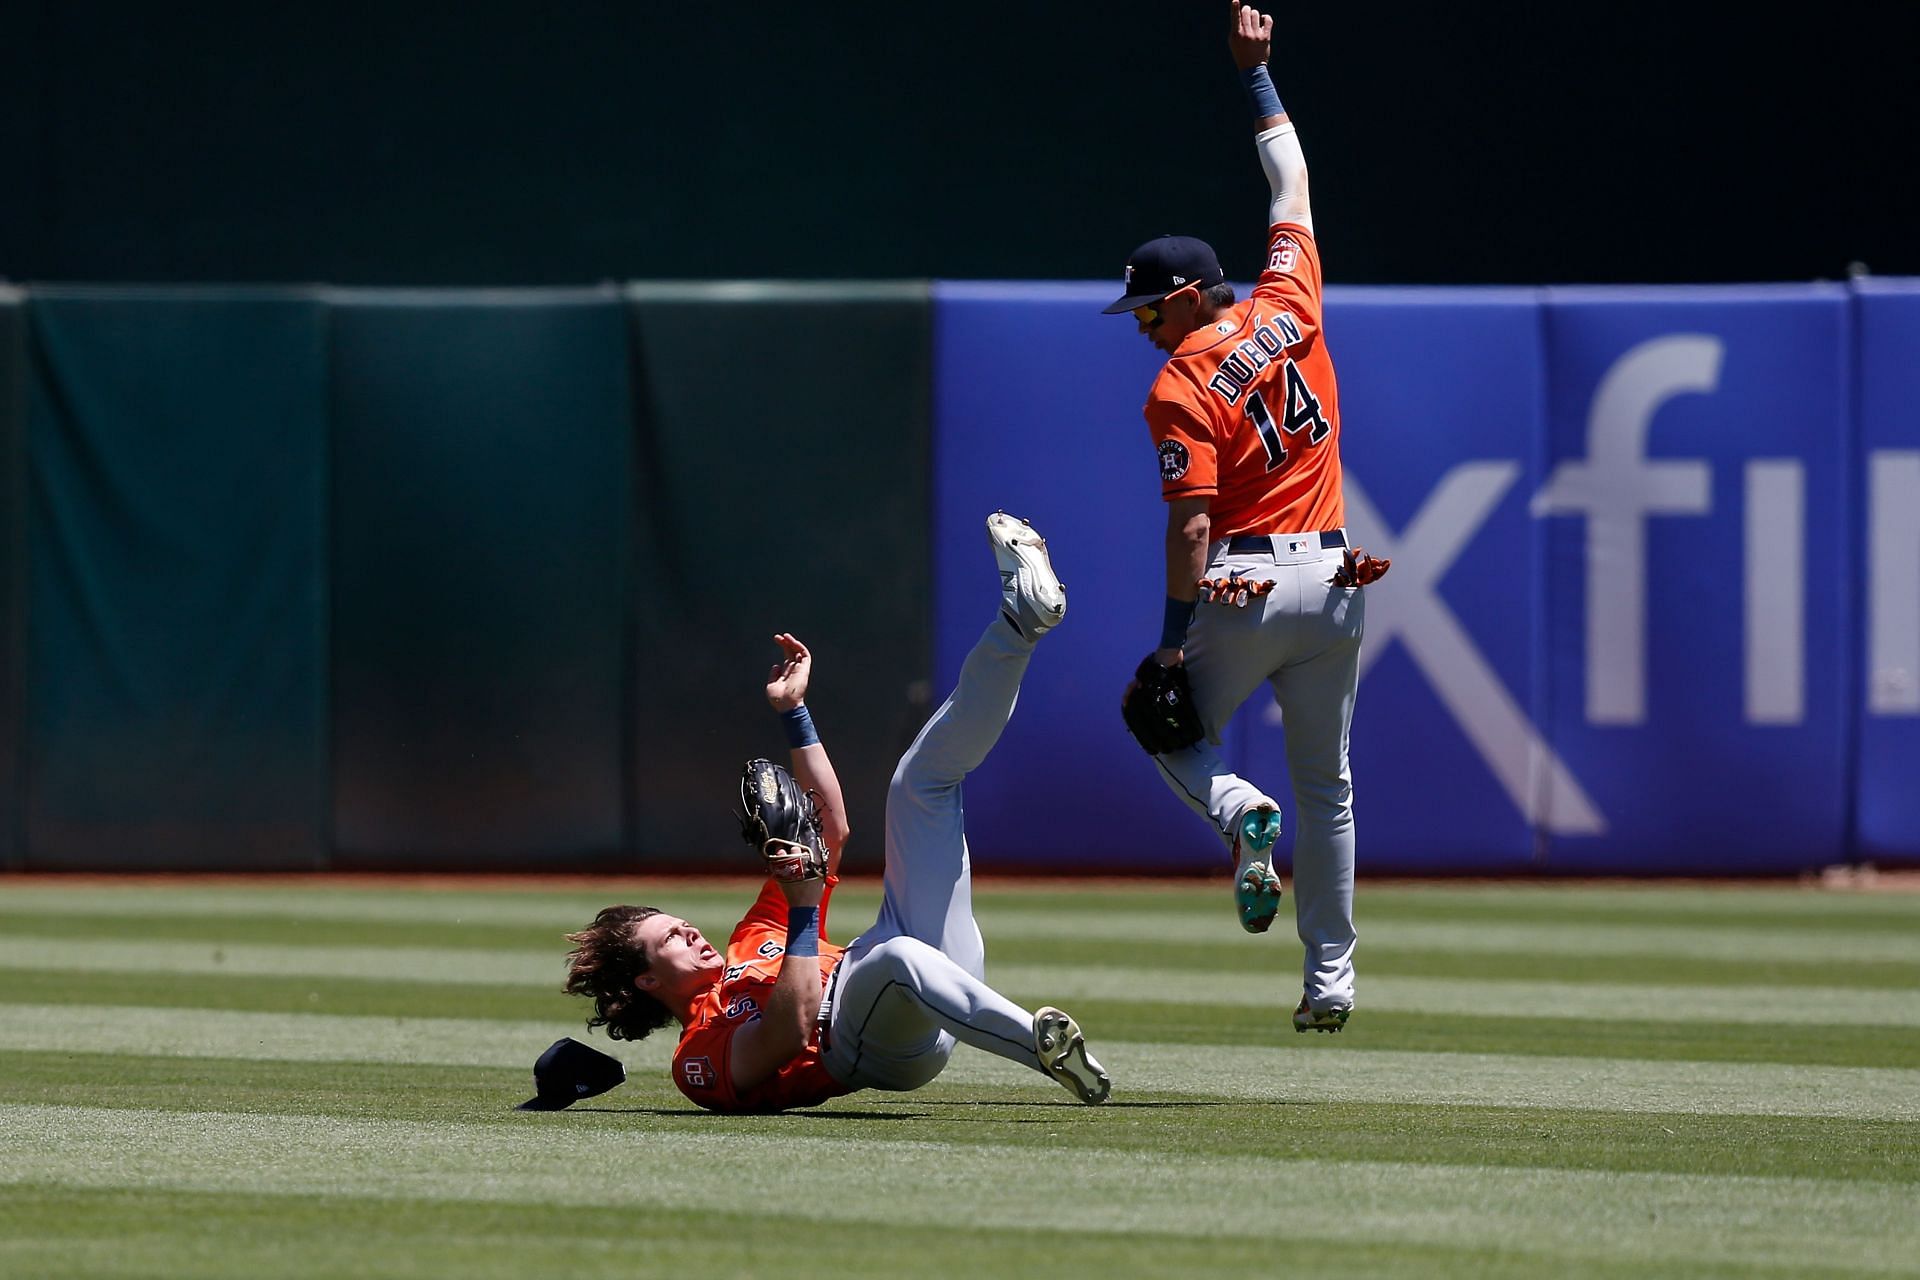 I hate baseball sometimes we got swept by the f***ng athletics - Houston Astros  fans' rage spills over to Twitter after being swept by last-place Oakland  Athletics